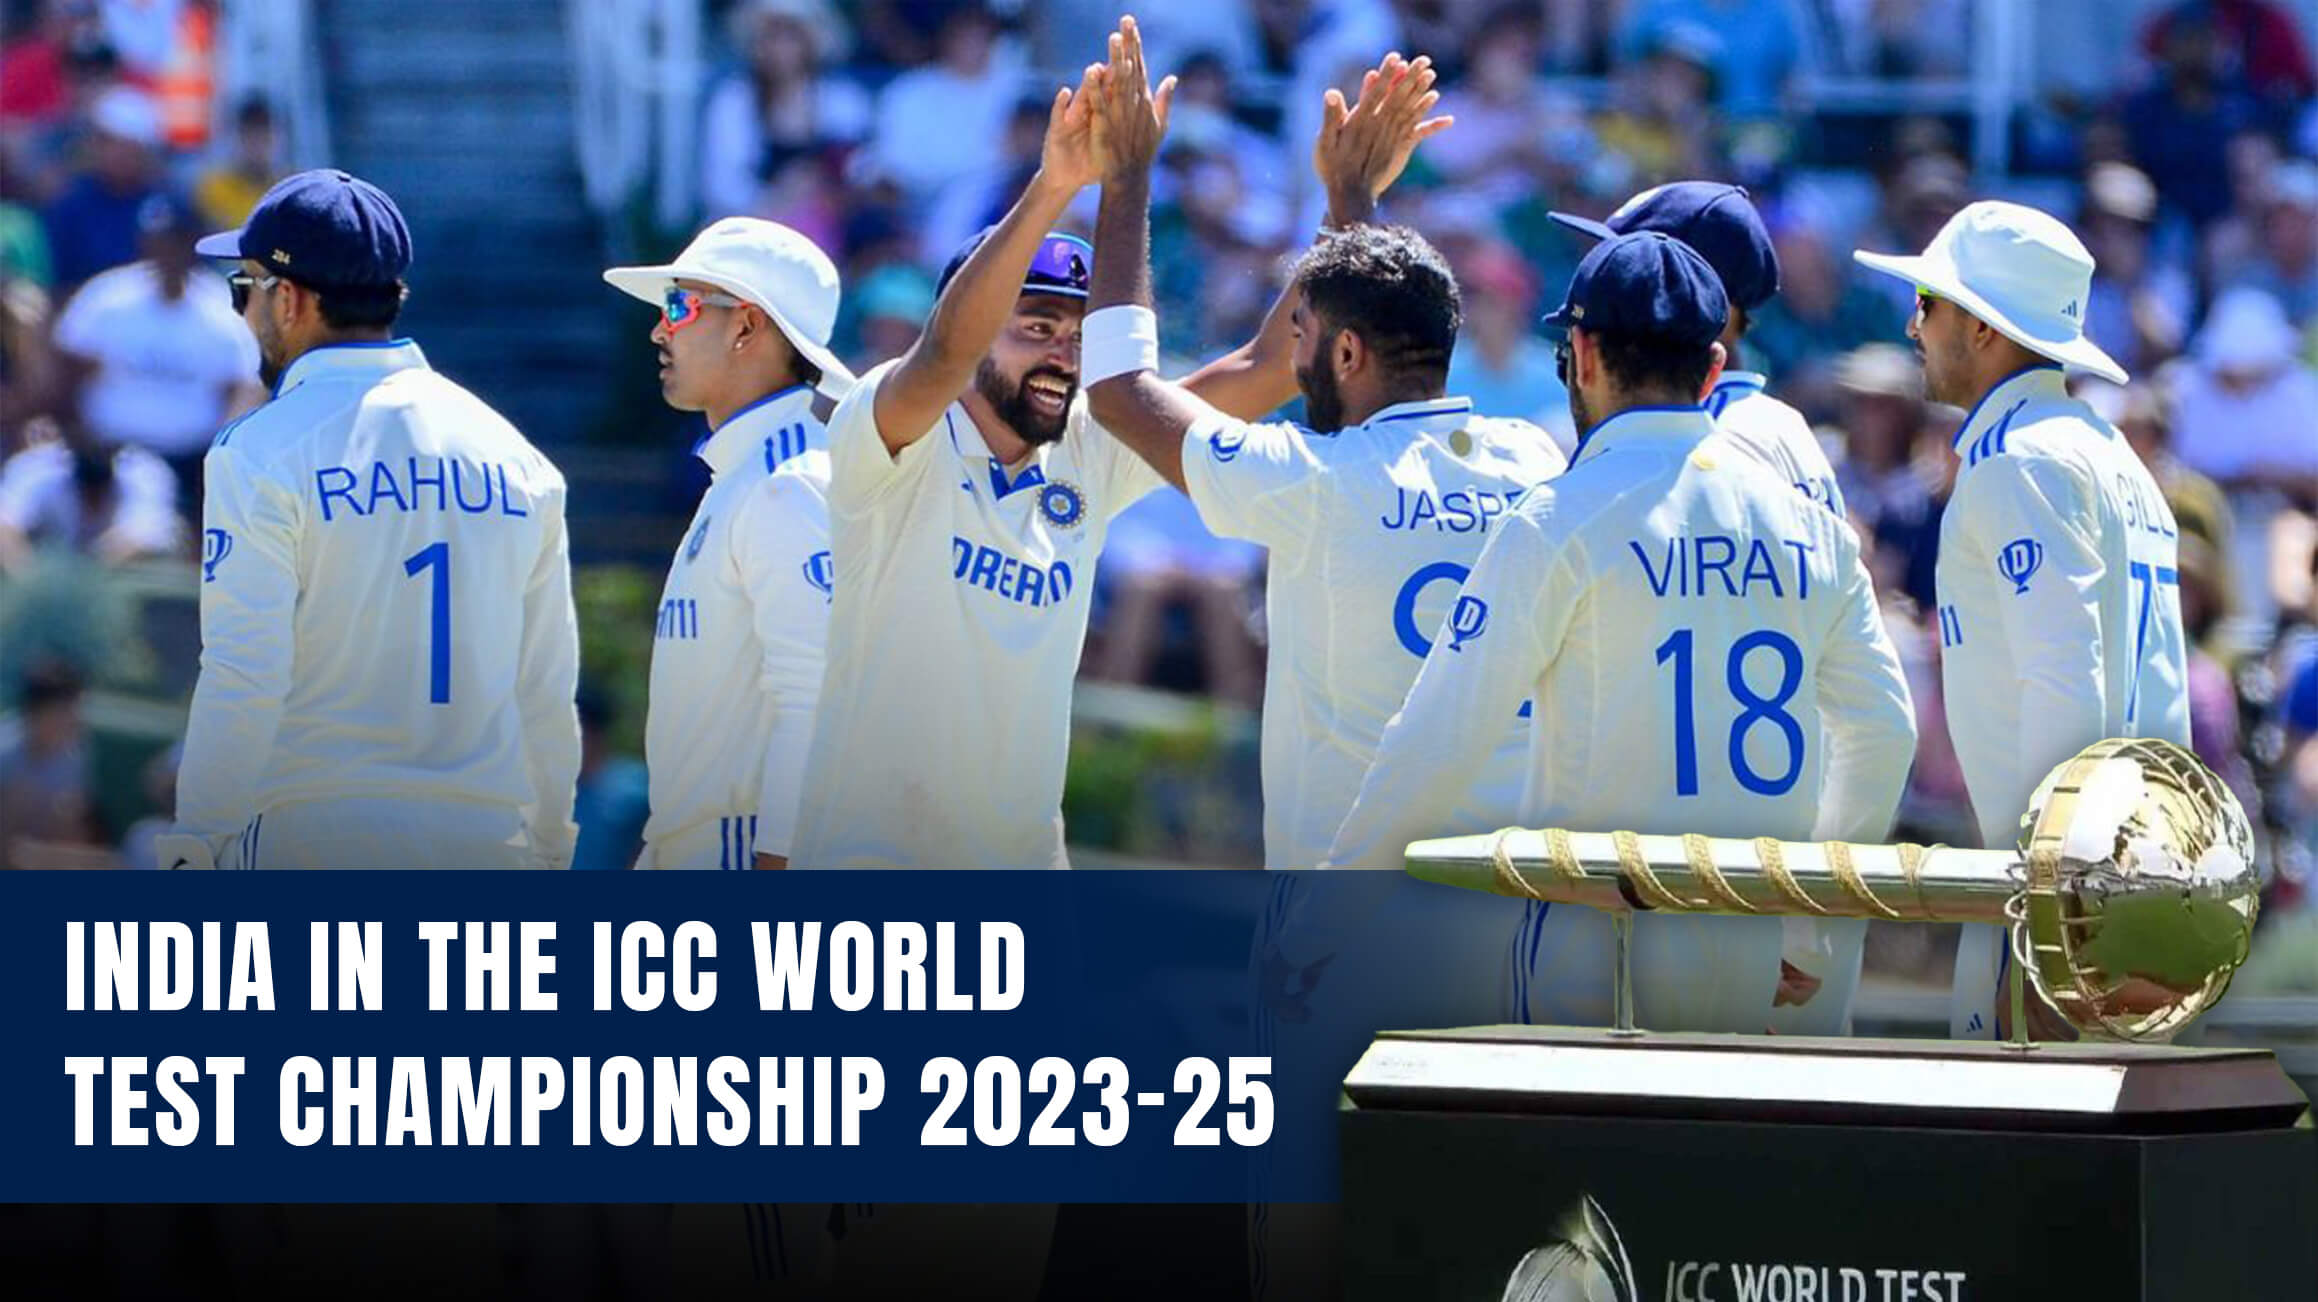 India in the ICC World Test Championship 2023-25